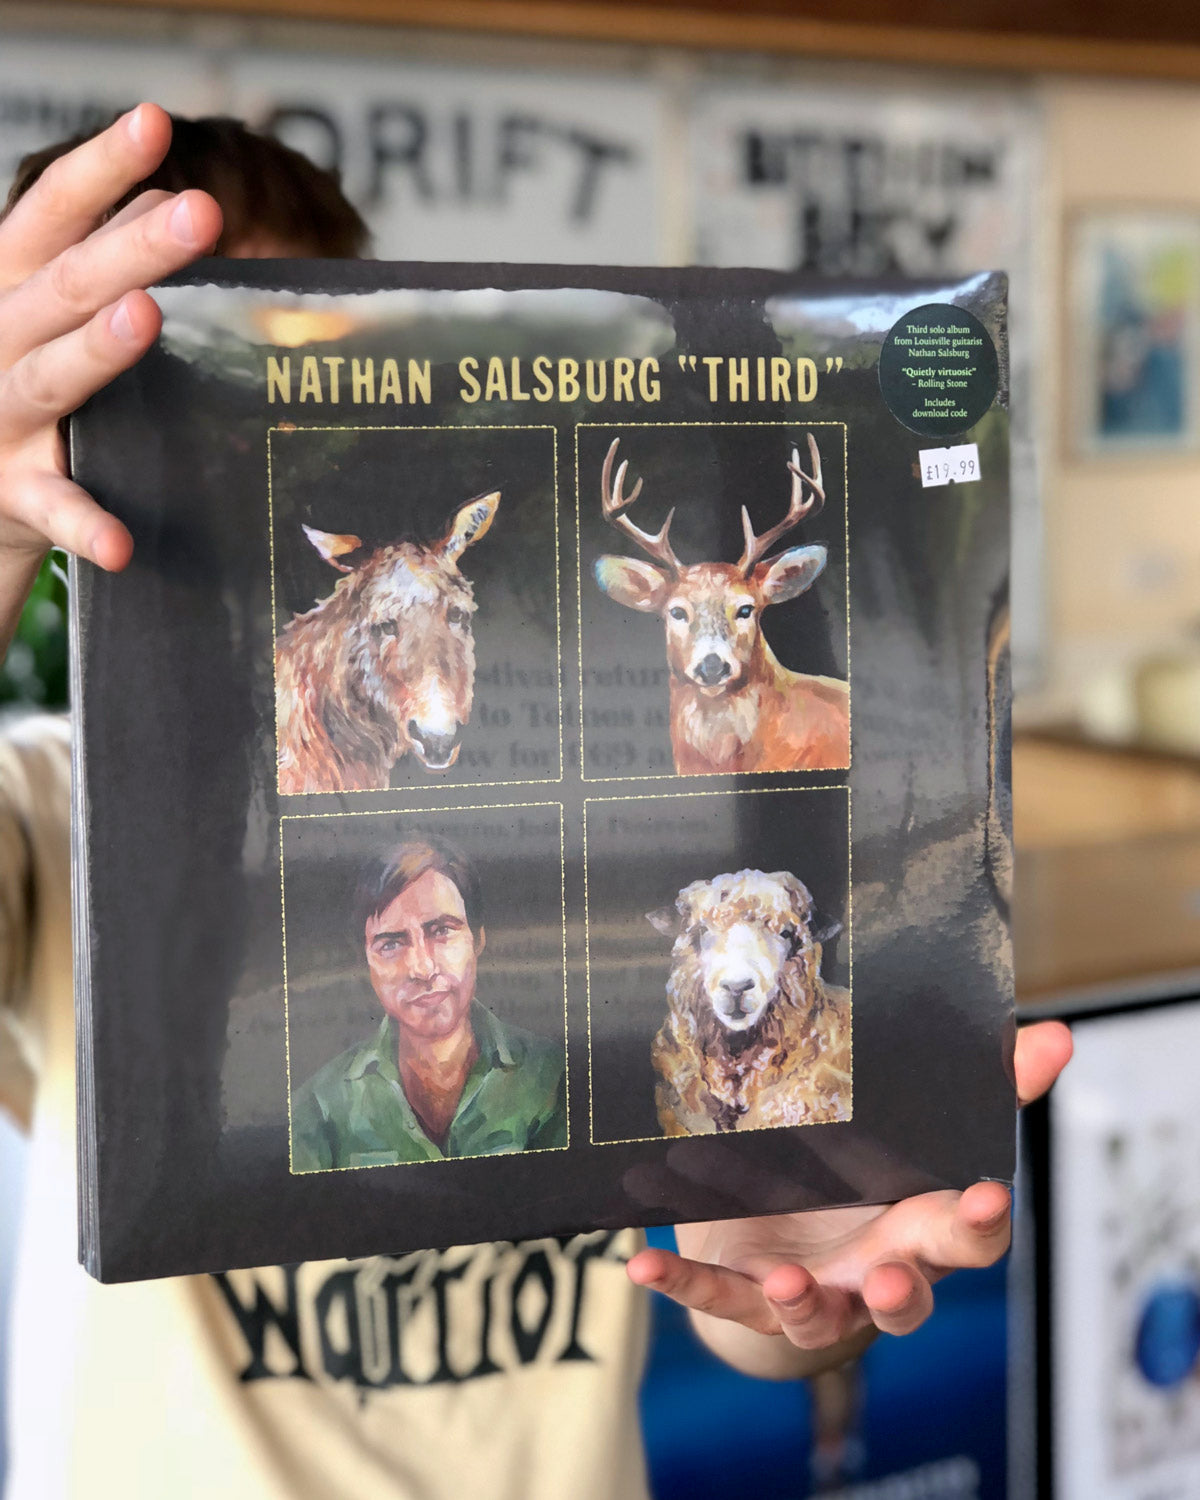 ROTW: Nathan Salsburg, Ty Segall & White Fence, Negative Scanner, Pram, Black Lodge and more.